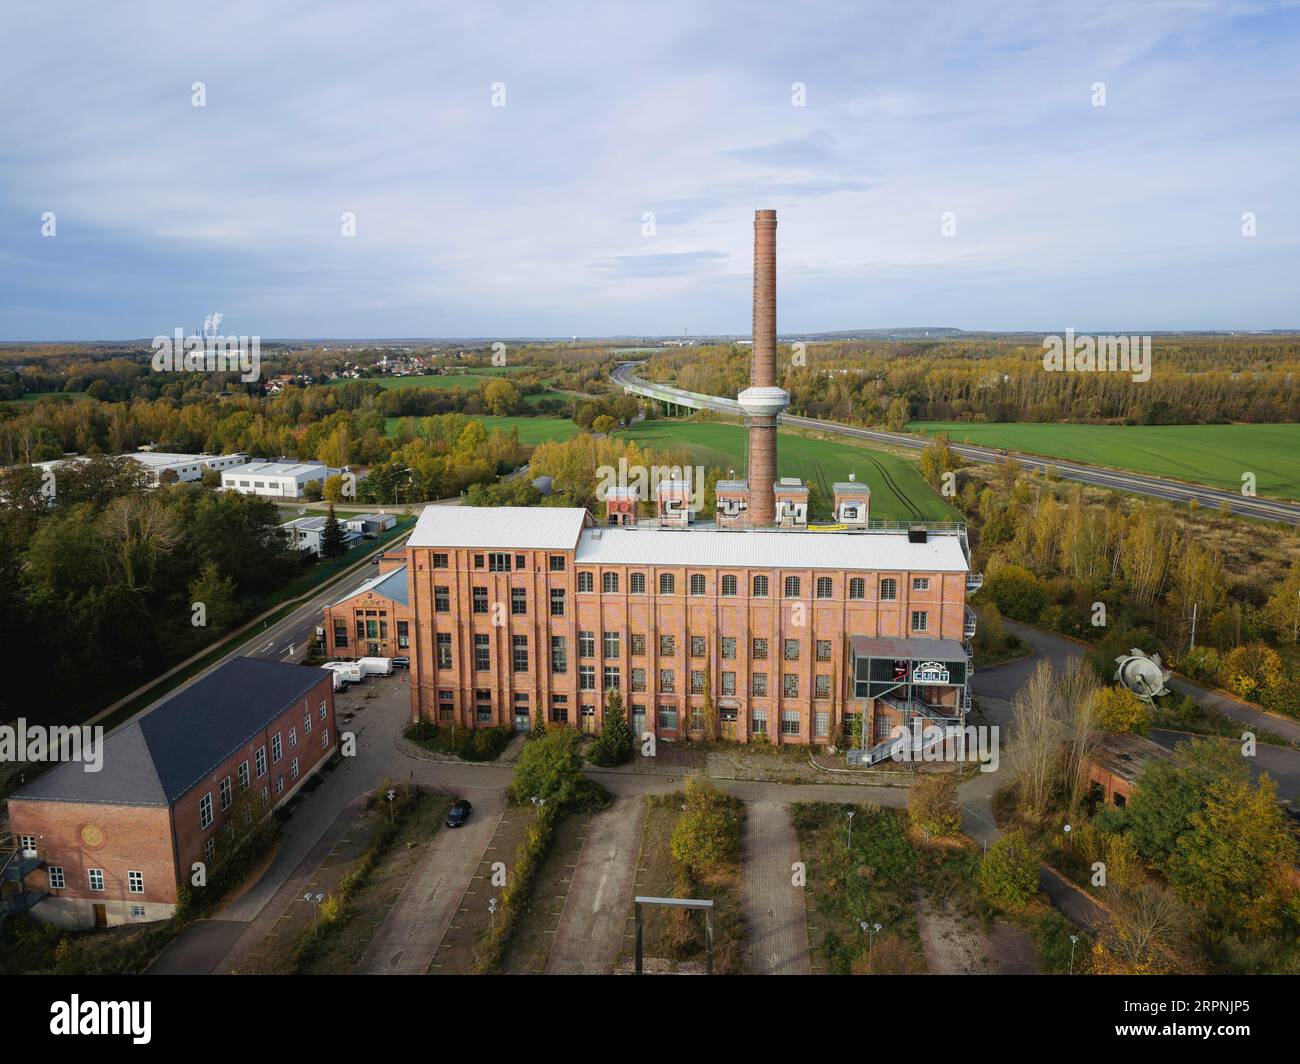 The briquette factory is a piece of the region's industrial history. Coal from the open-cast mine in Wyhra used to be processed into briquettes here. Stock Photo